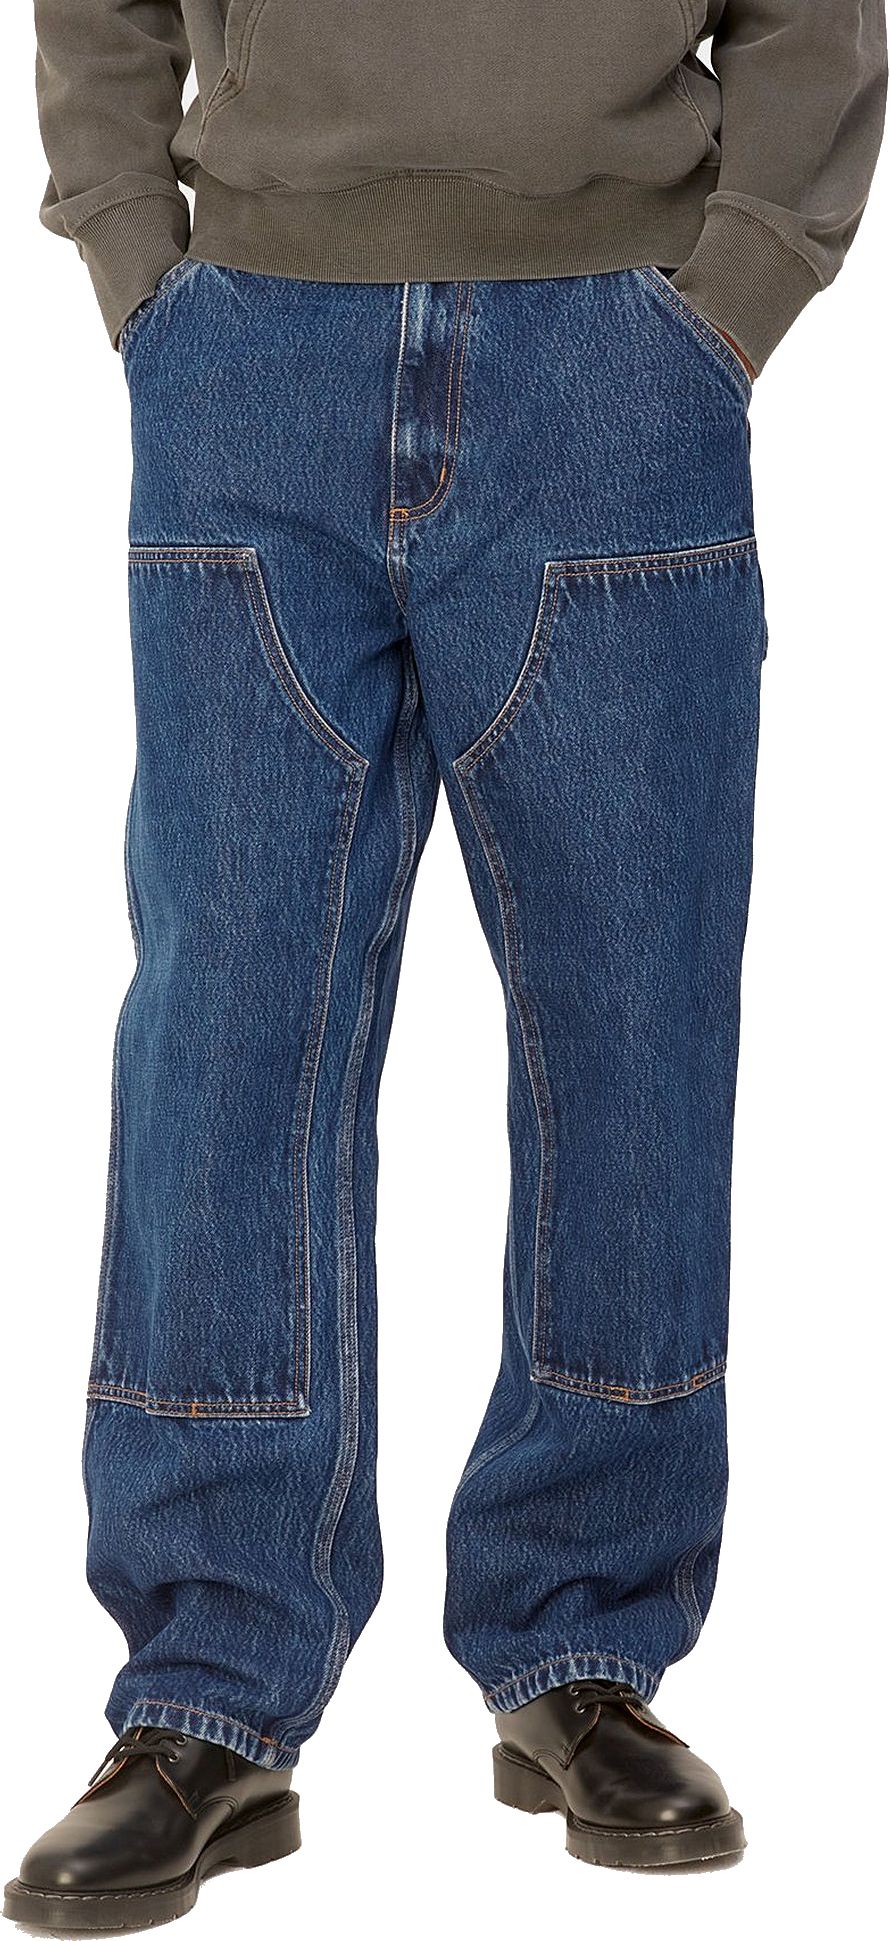  Carhartt Wip Jeans Double Knee Pant Blue Stone Washed Uomo - 3